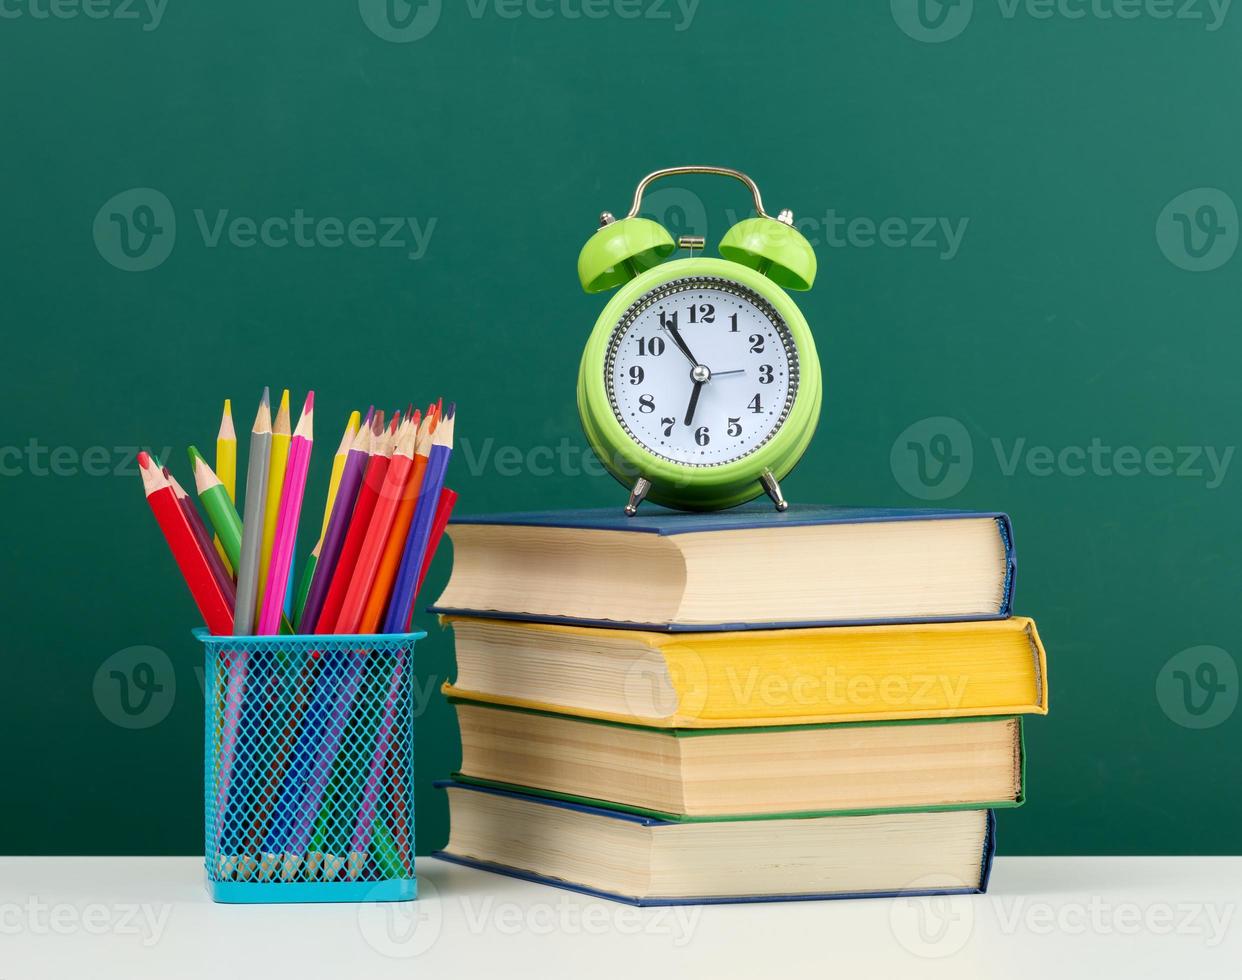 stack of books, a round alarm clock and multicolored pencils on the background of an empty green chalk board photo